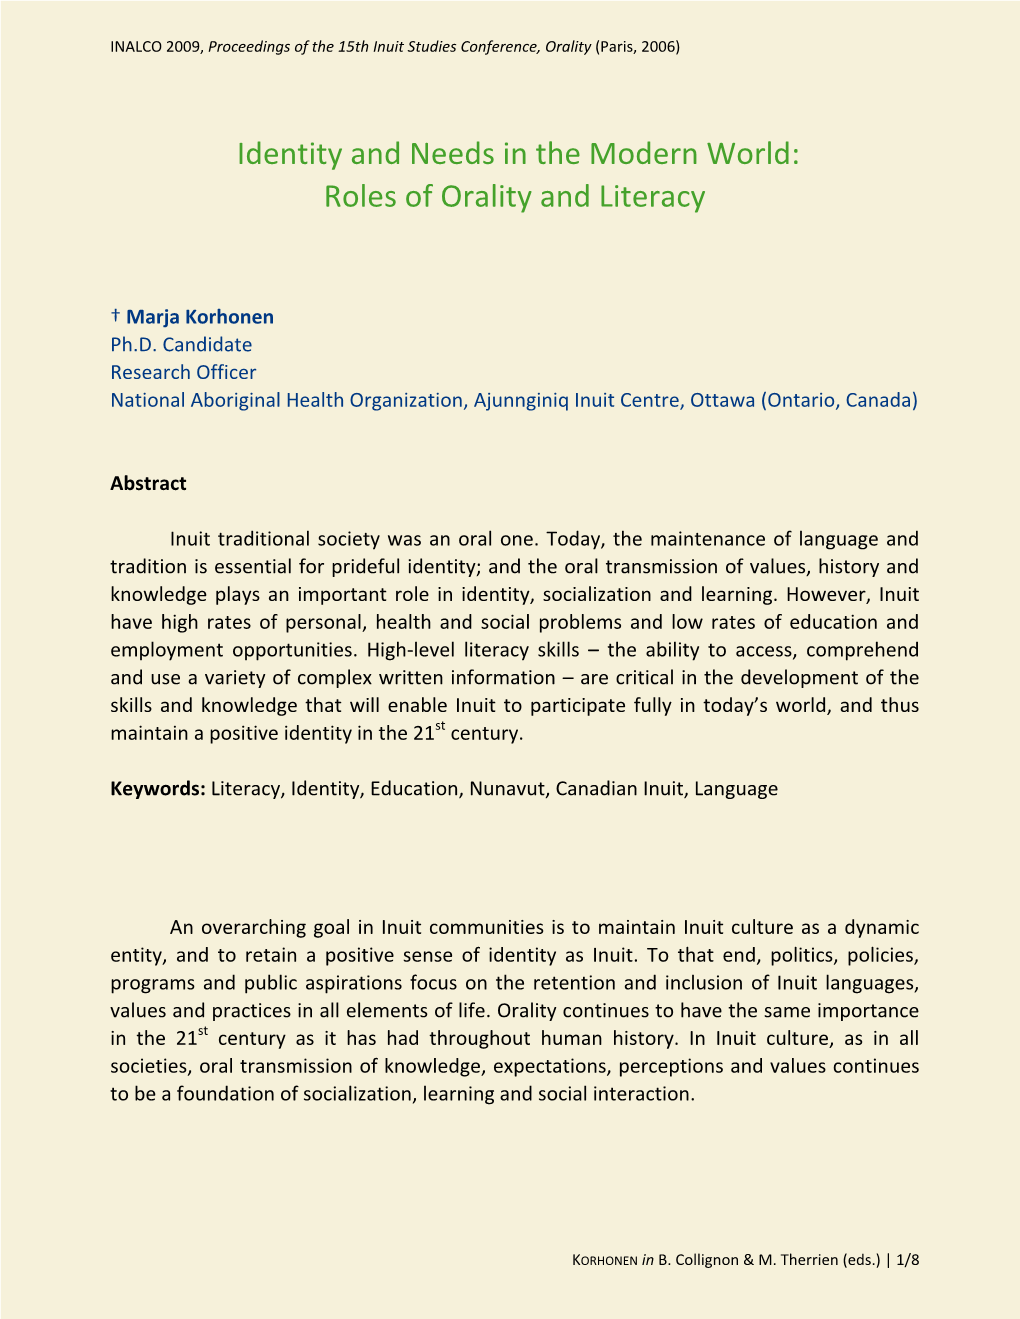 Identity and Needs in the Modern World: Roles of Orality and Literacy